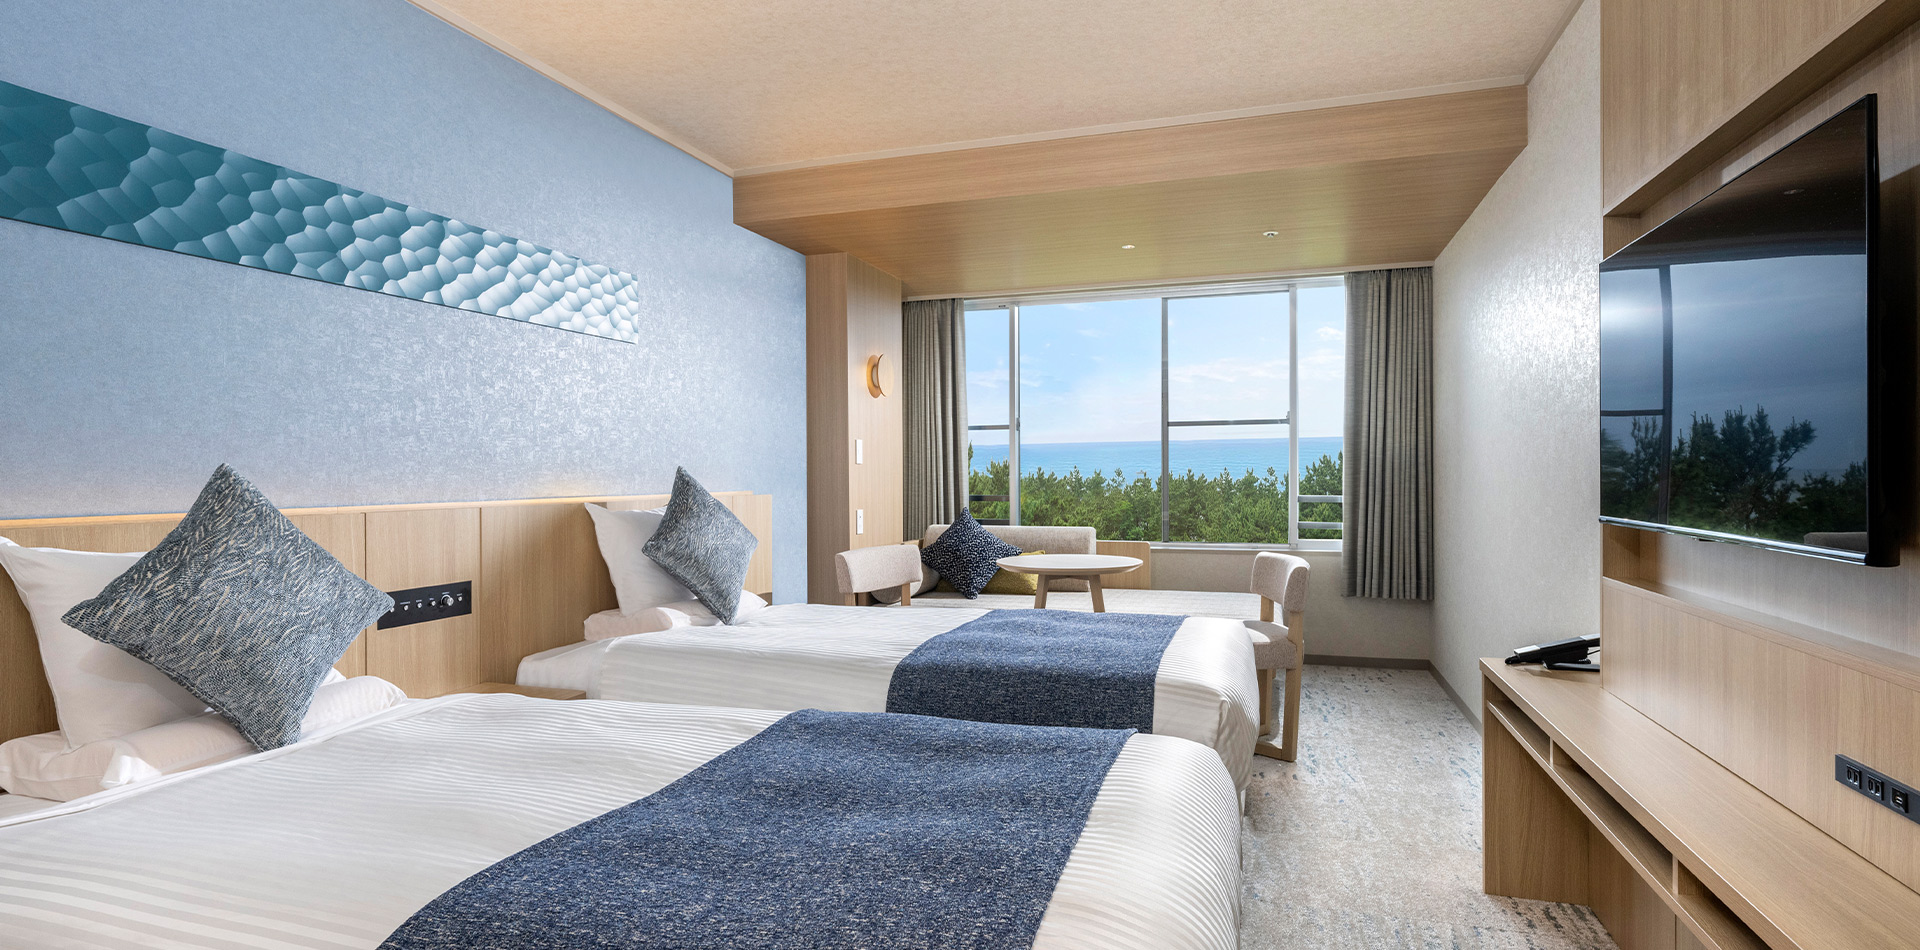 Guest rooms with a sophisticated design, ``Superior Room'', is now available.